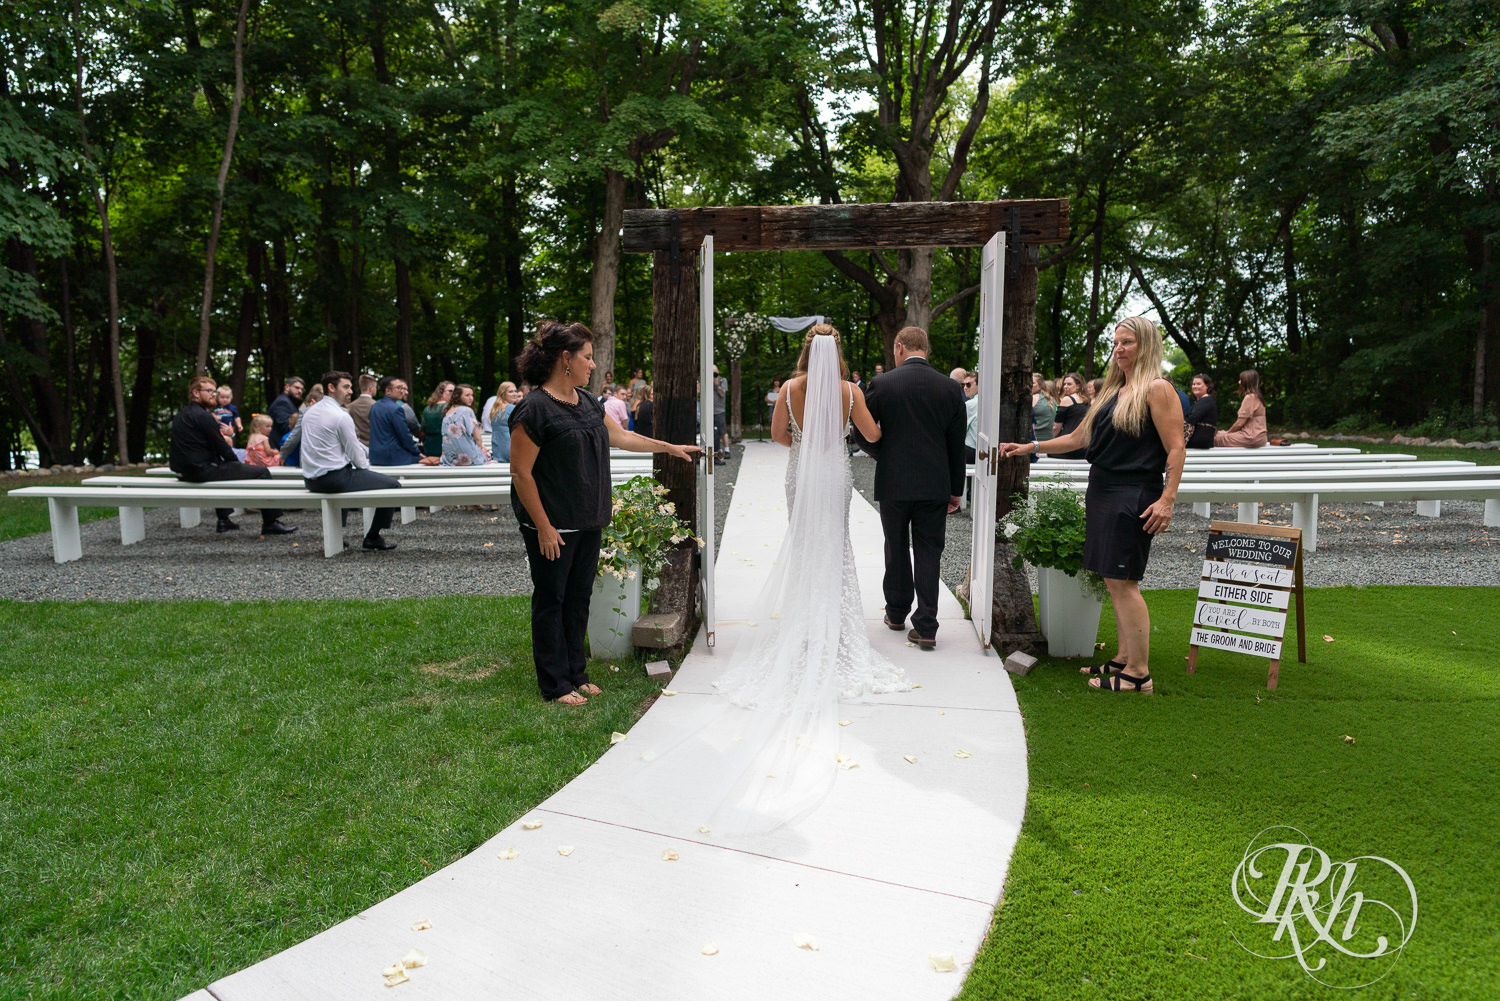 Bride walks down down aisle with dad on wedding day at Ahavah Cottage in Elysian, Minnesota.